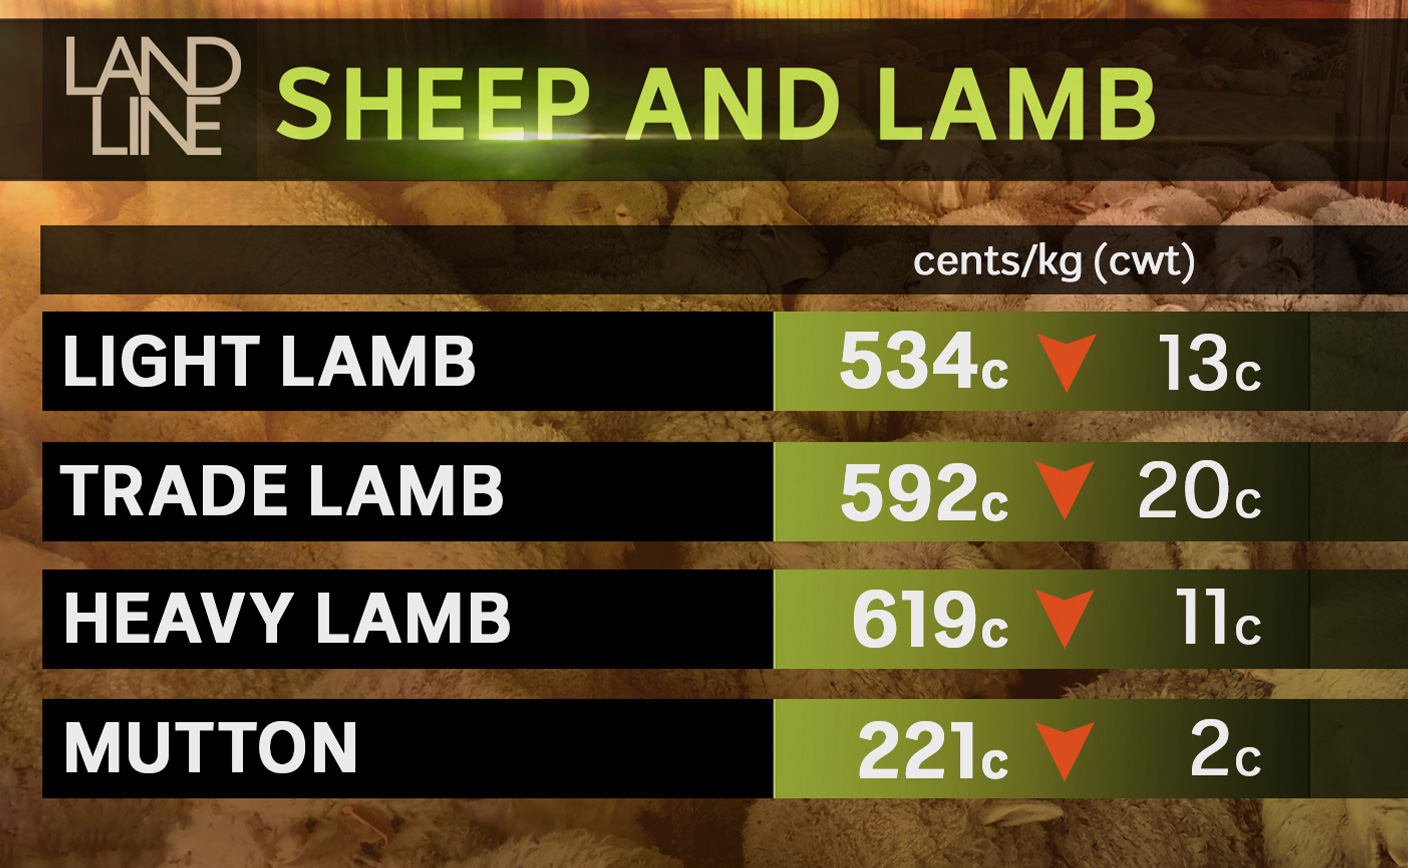 Lamb and sheep prices